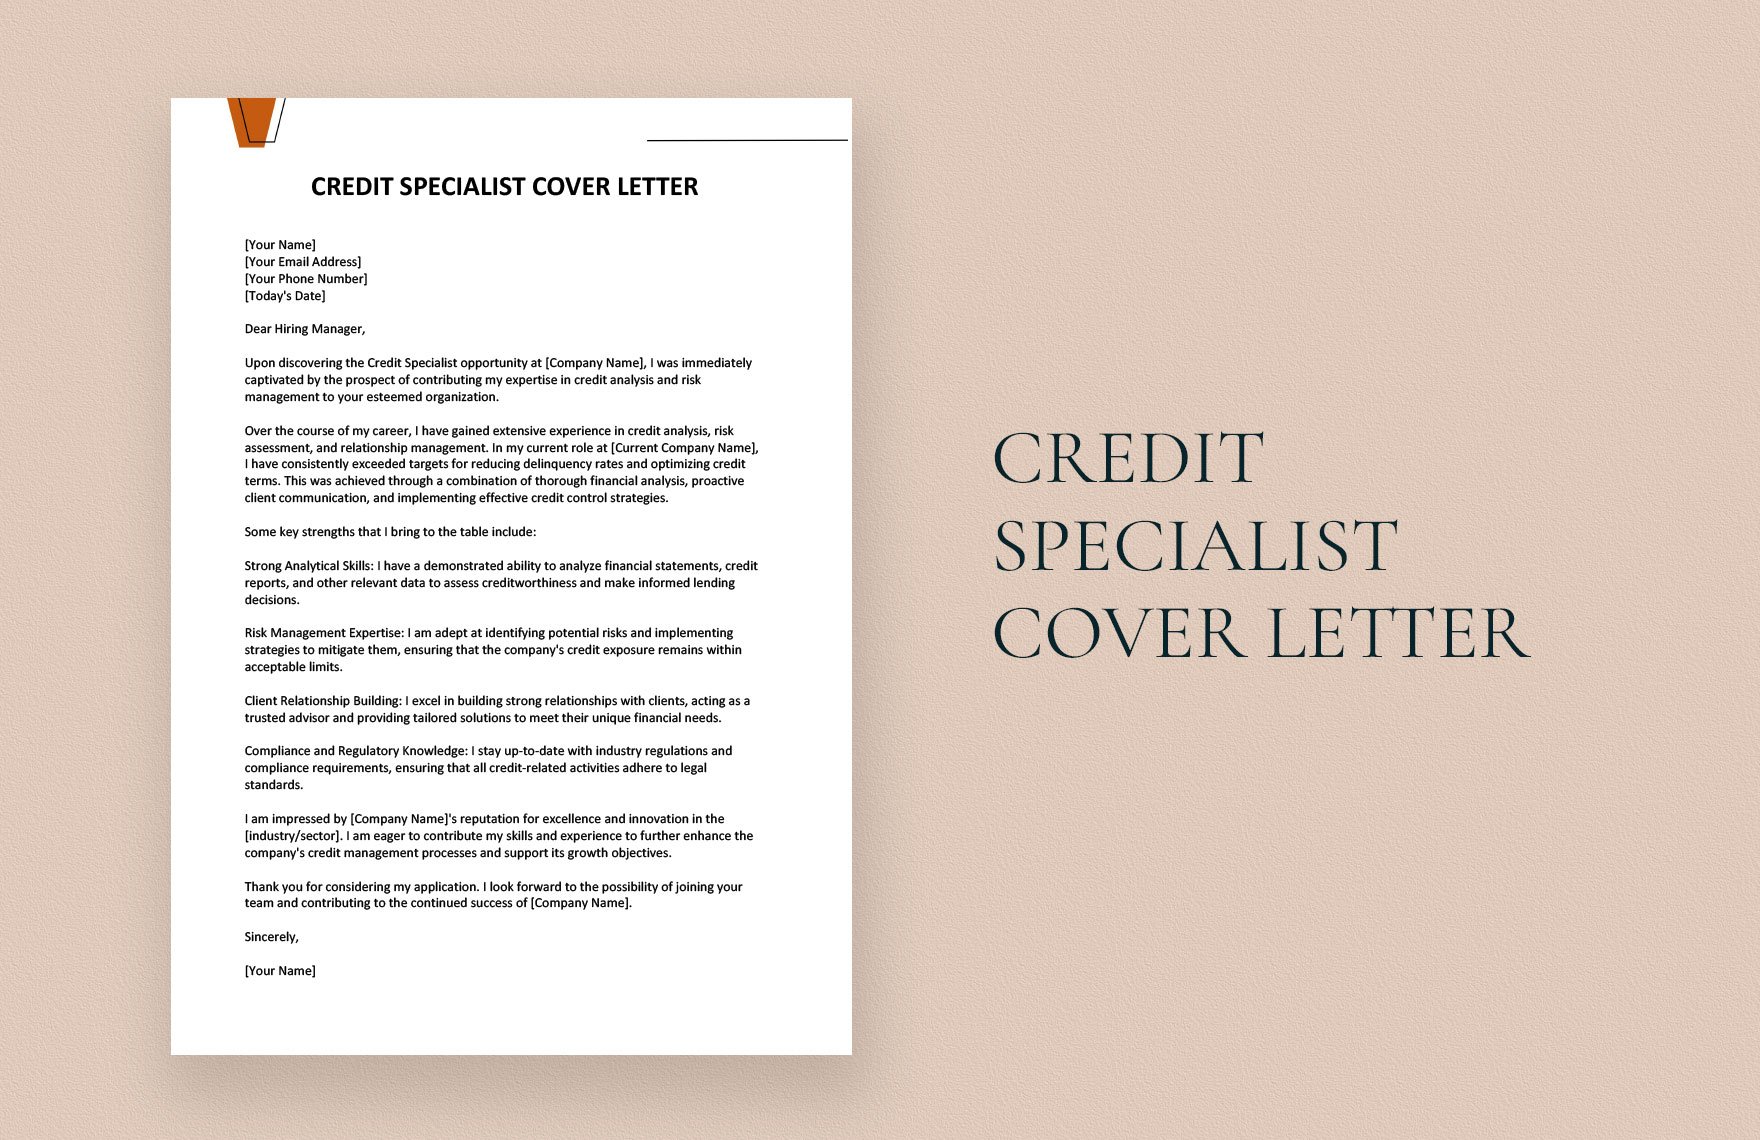 Credit Specialist Cover Letter